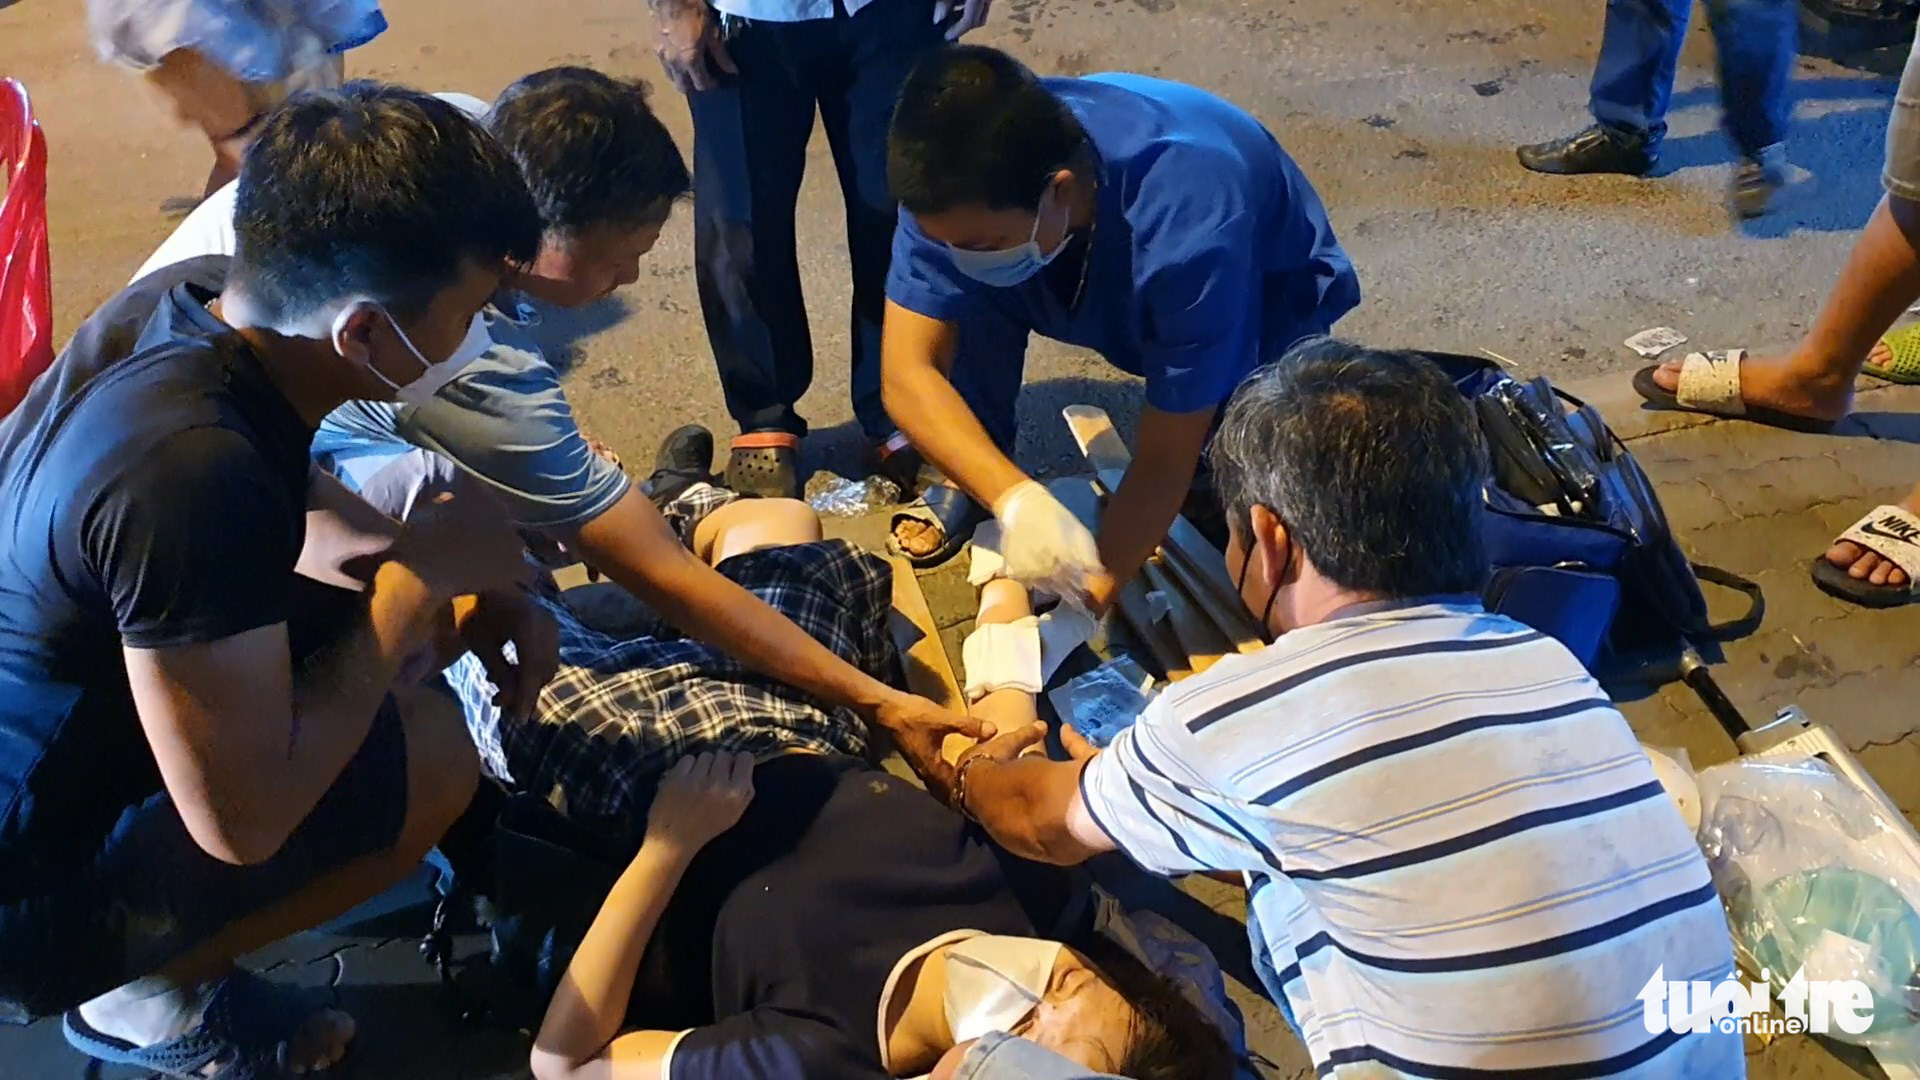 Medics provide first aid to a wounded victim in Thu Duc City, Ho Chi Minh City, May 5, 2022. Photo: Minh Hoa / Tuoi Tre